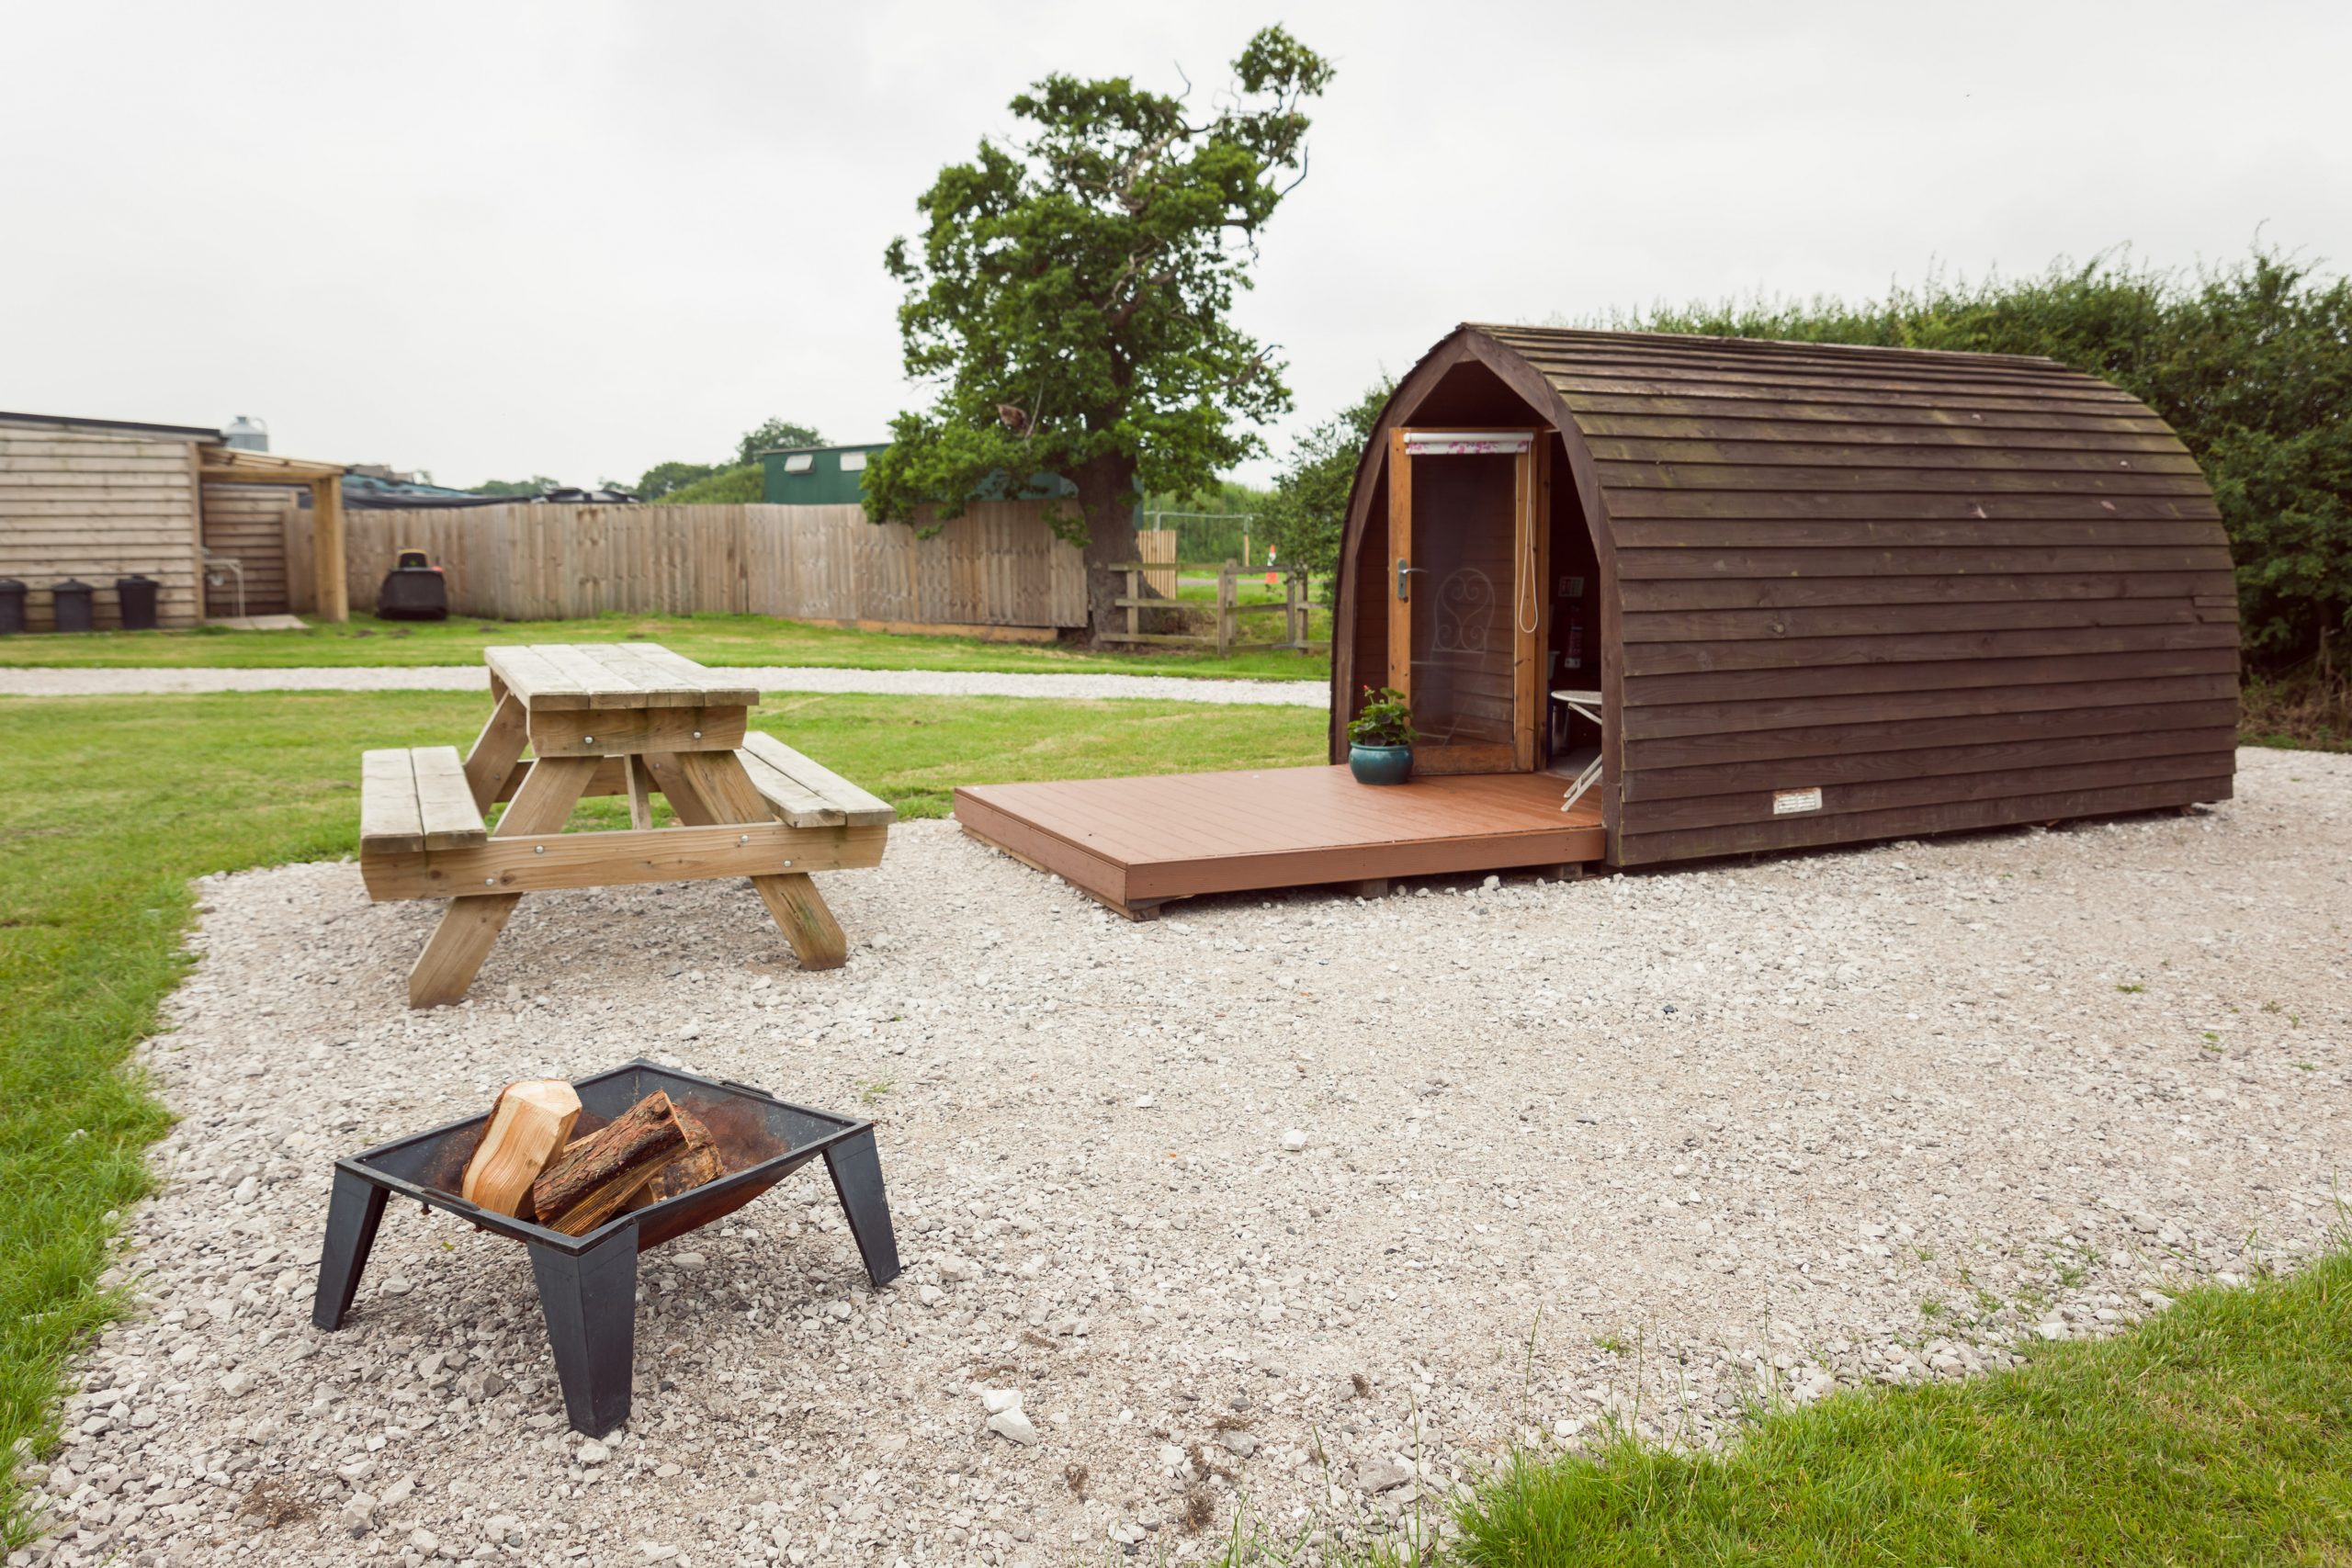 Pitch and Canvas | Glamping and Camping in Cheshire | Firepit